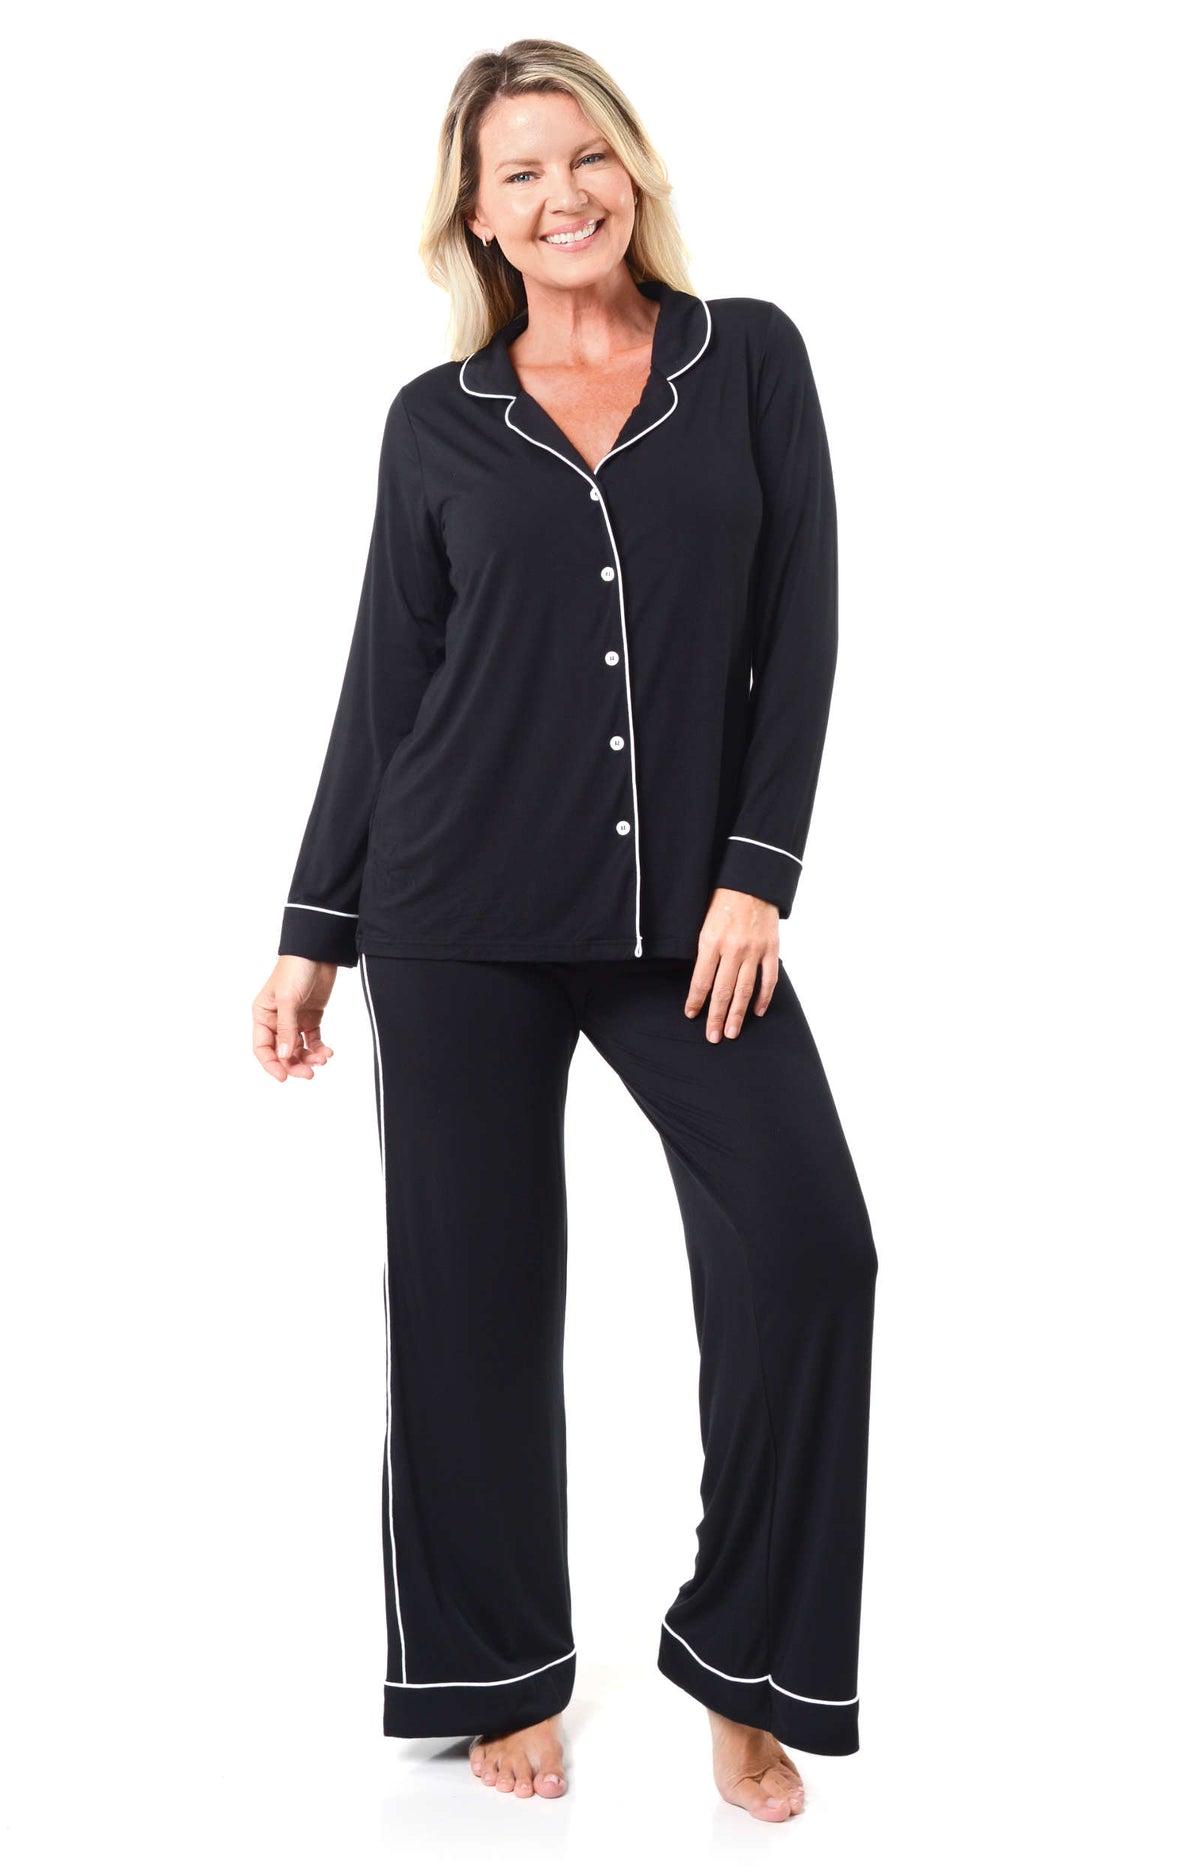 https://cdn.shopify.com/s/files/1/1802/3765/products/Pajameez-AS-Piping-Long-Black-FRONT-ALT_1200x.jpg?v=1637293082